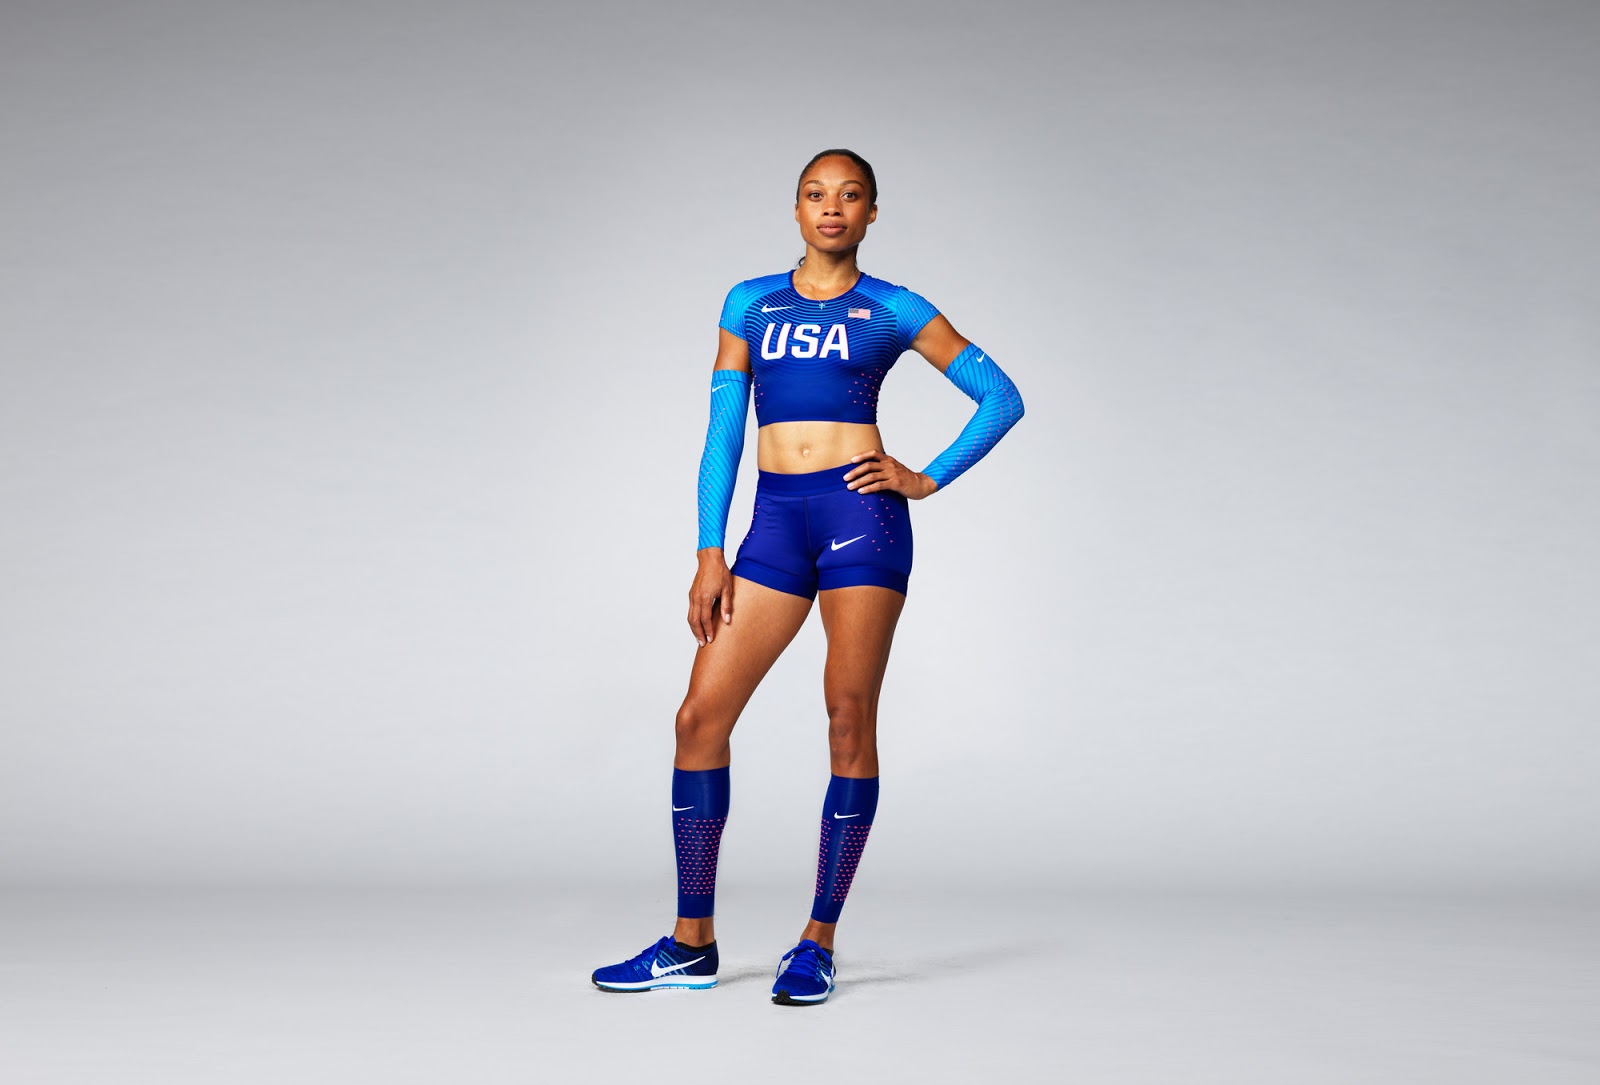 Super Punch USA 2016 track and field uniforms